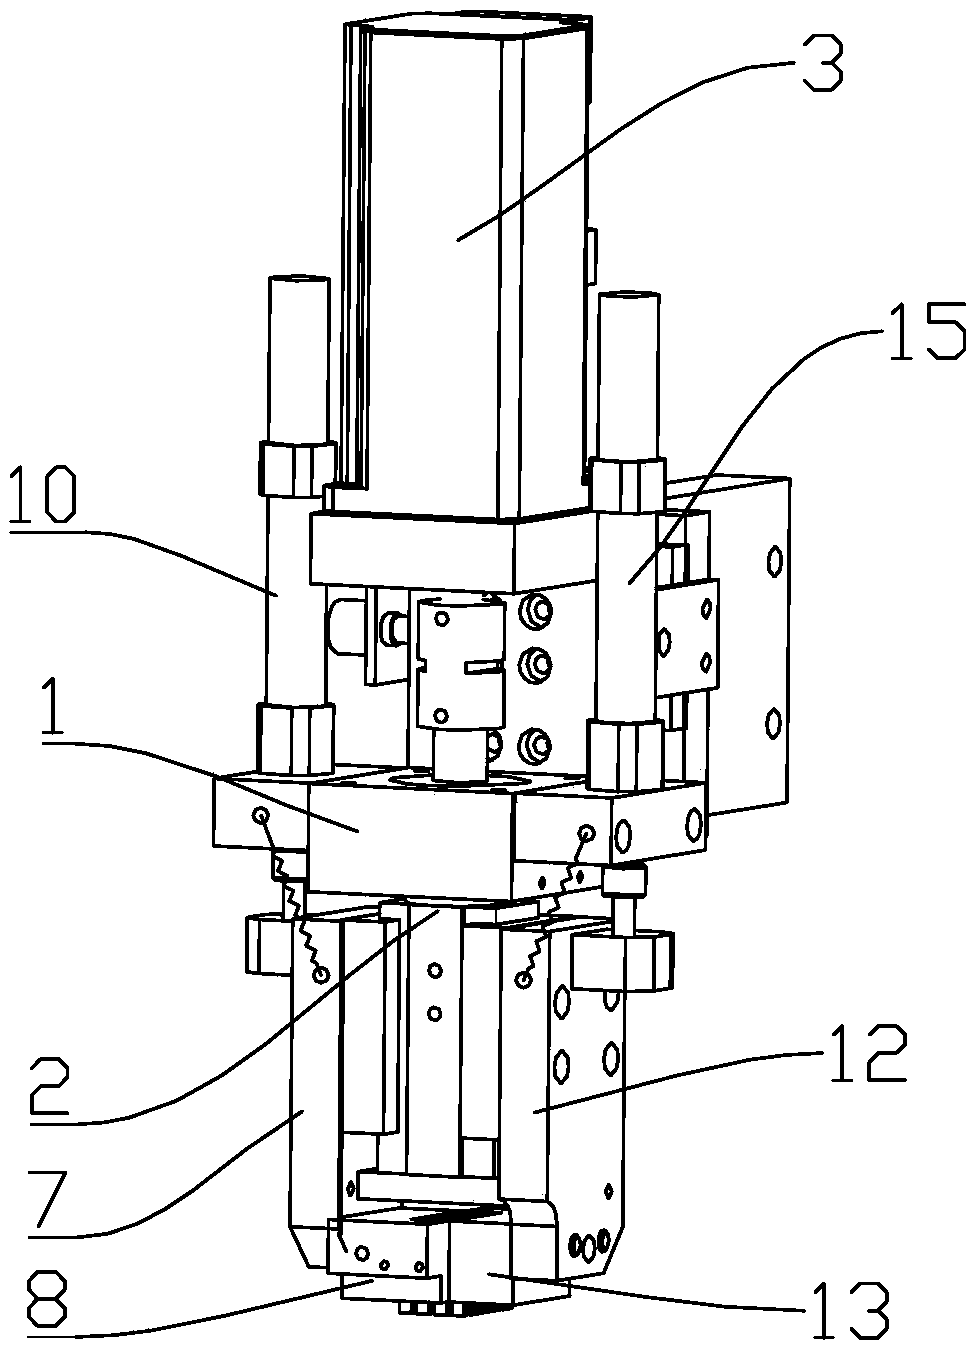 Rotary suction nozzle device